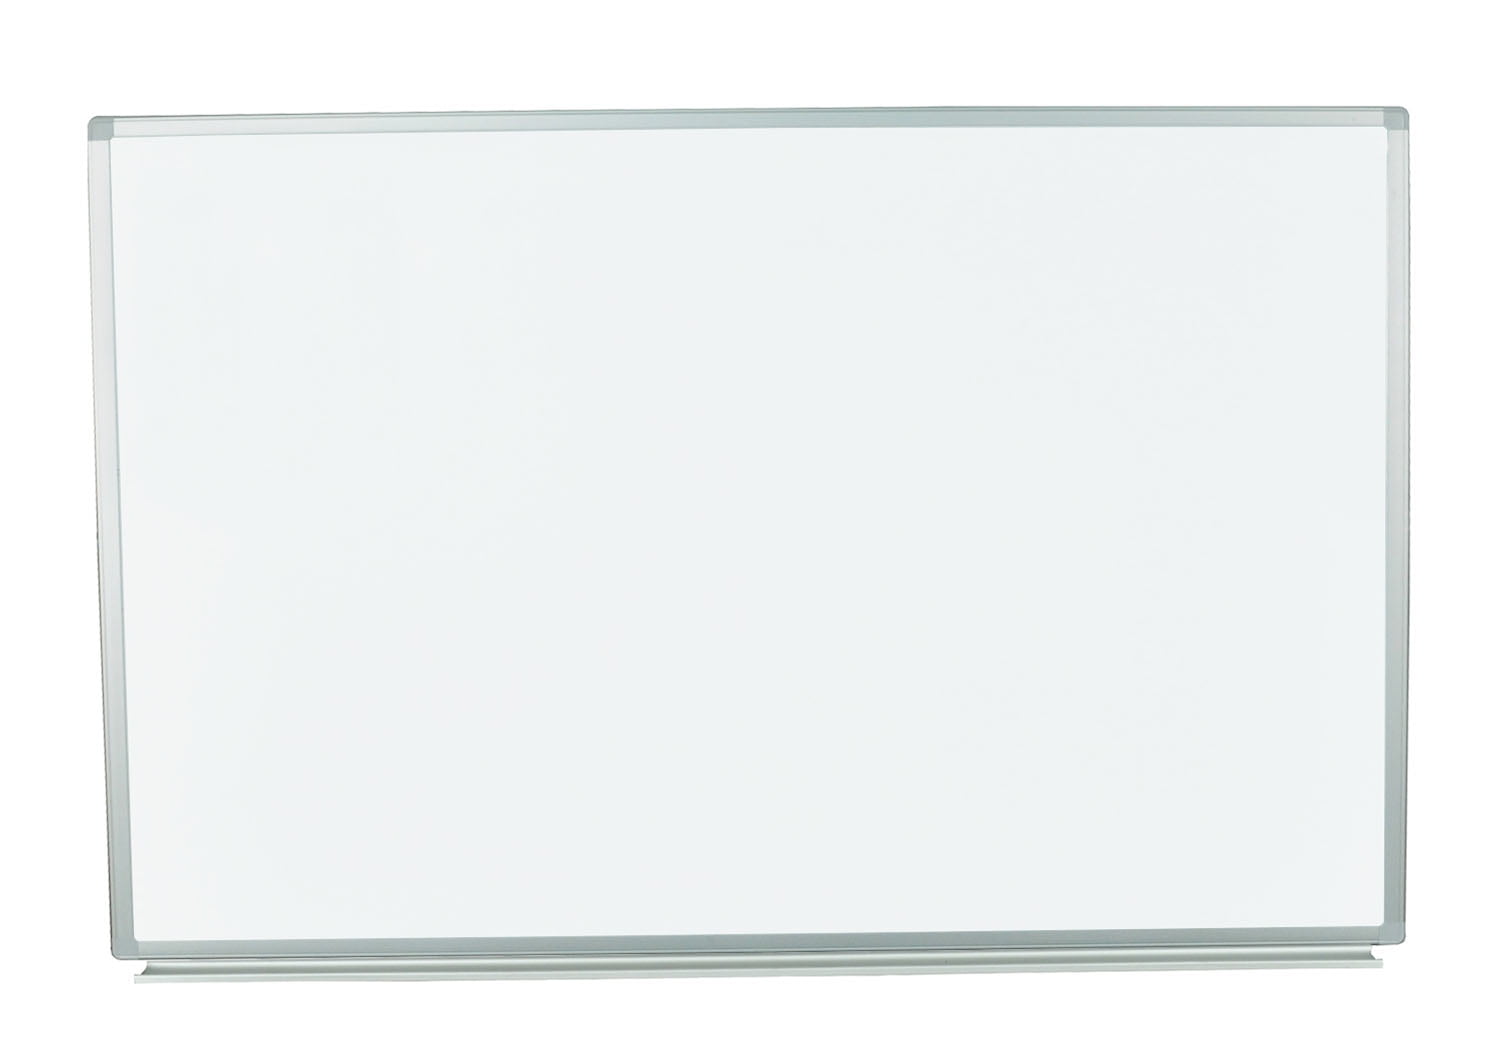 35 x For Use with HIGH Energy Magnets U Brands Magnetic Glass Dry Erase Board 